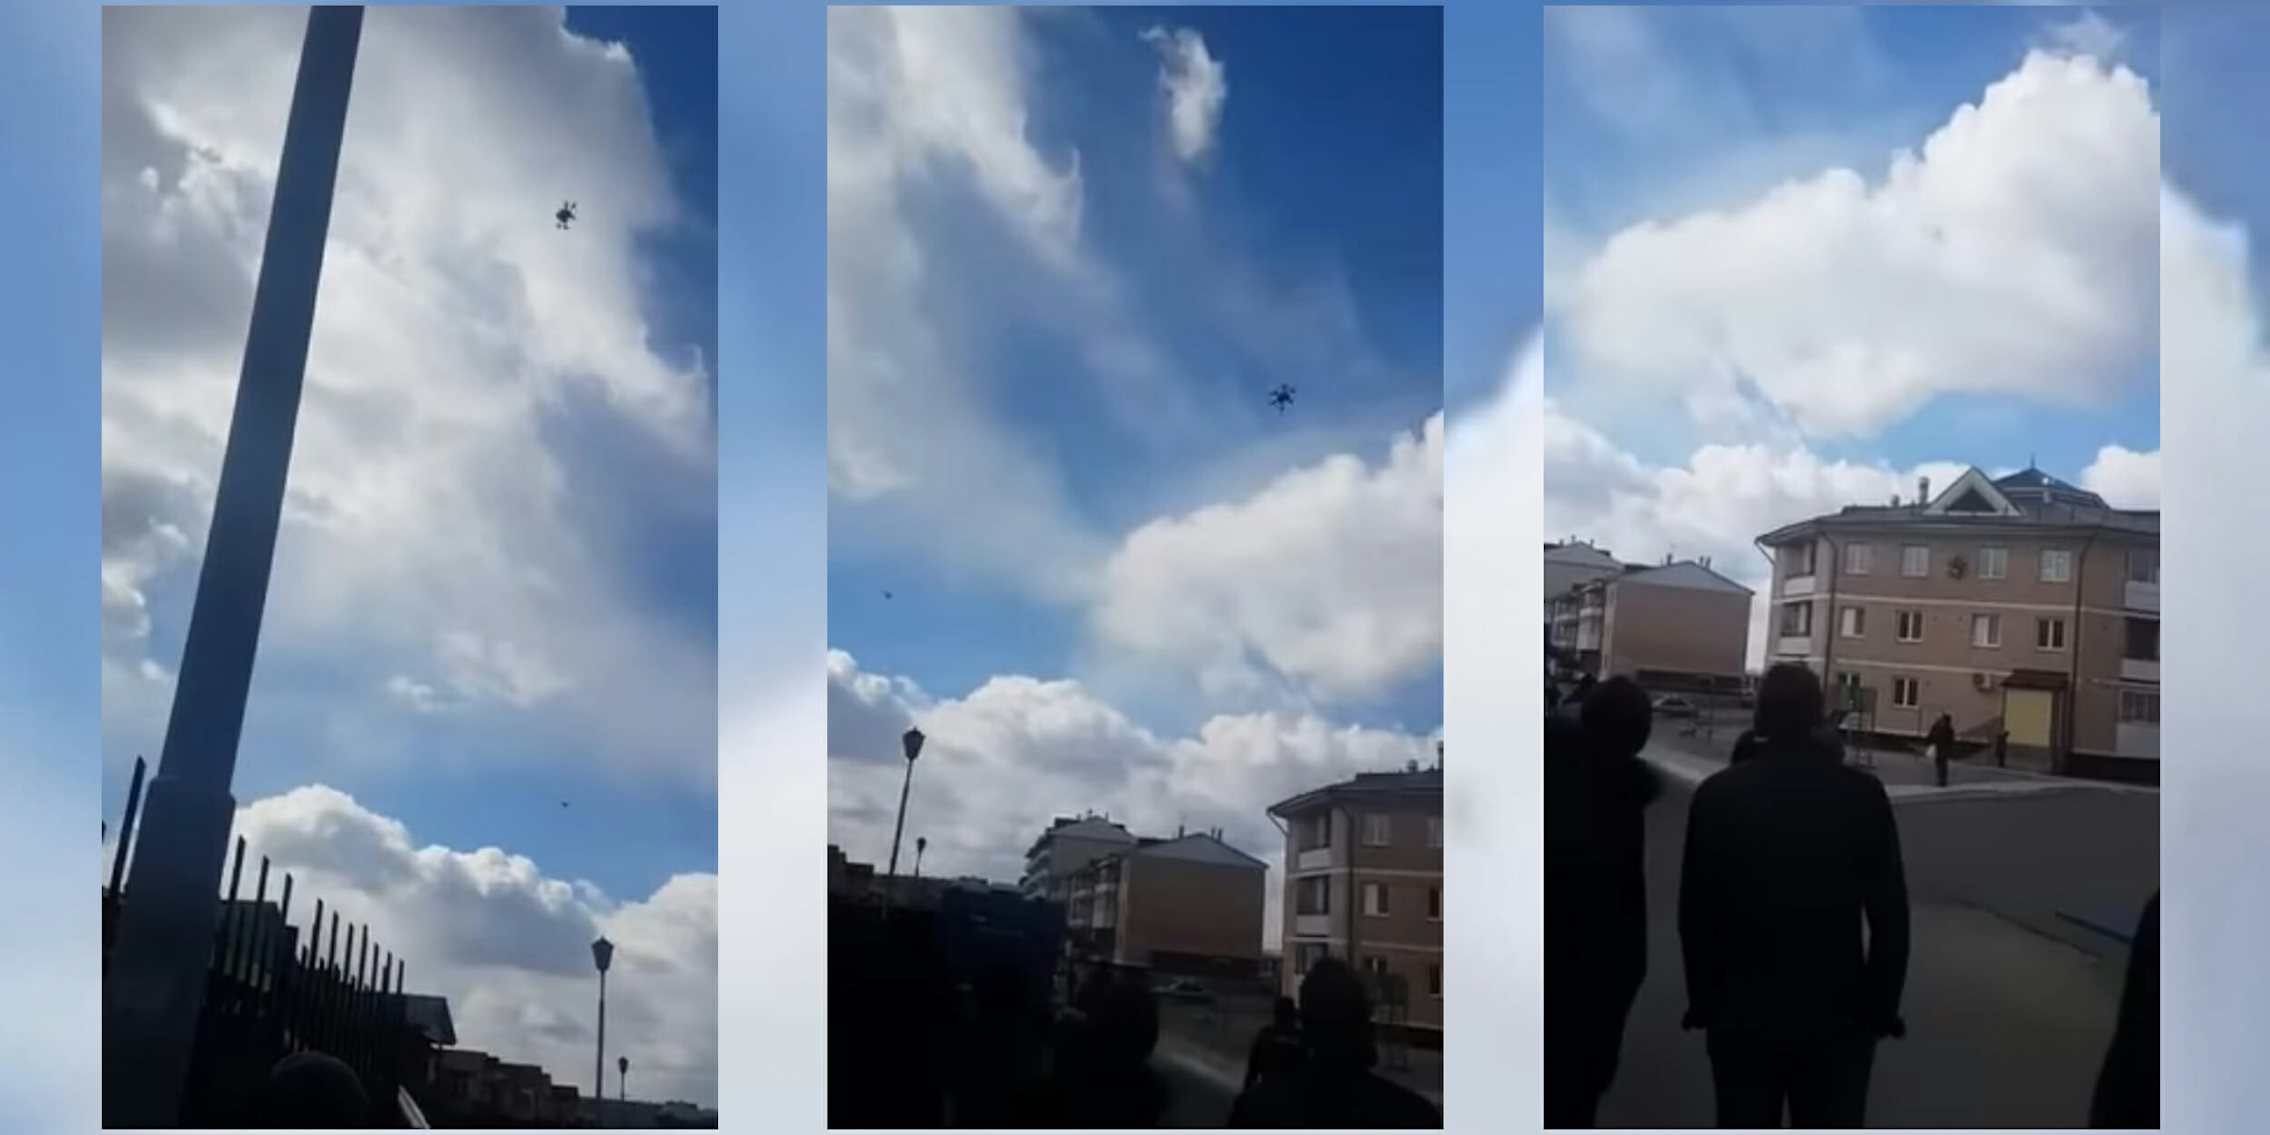 Russian postal drone hits house